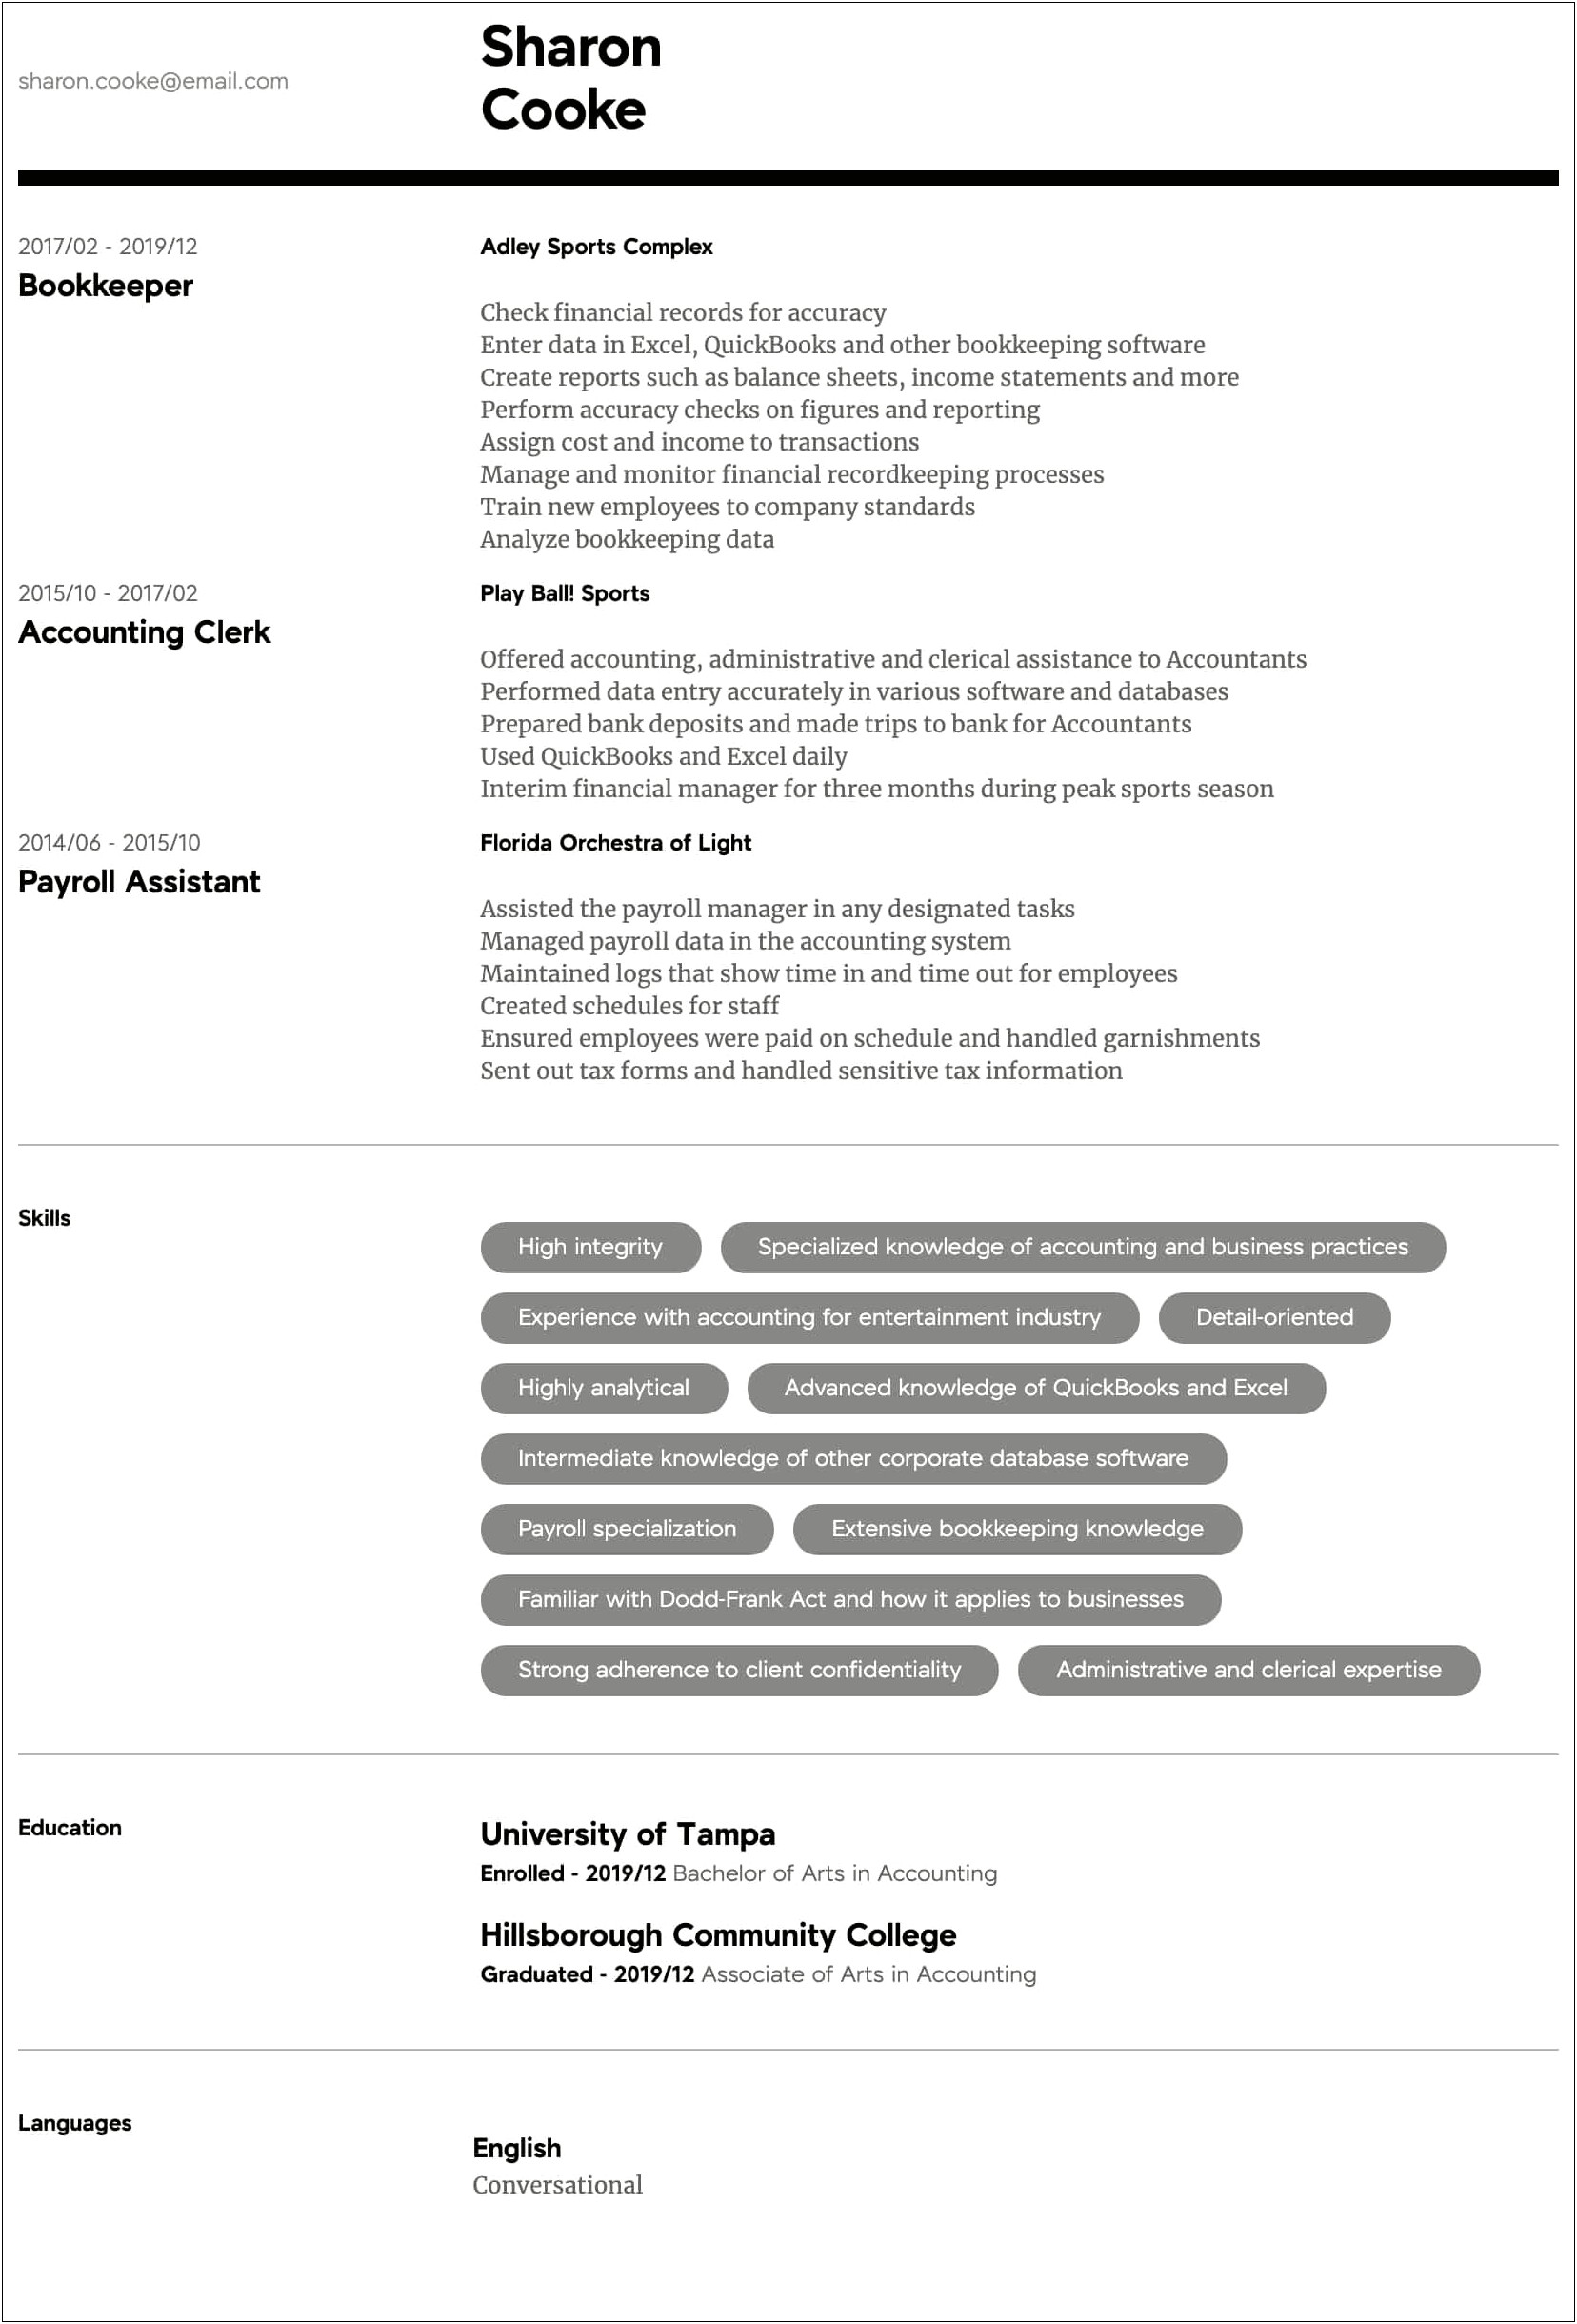 Resume Template Without Work Experience Required For Cpa